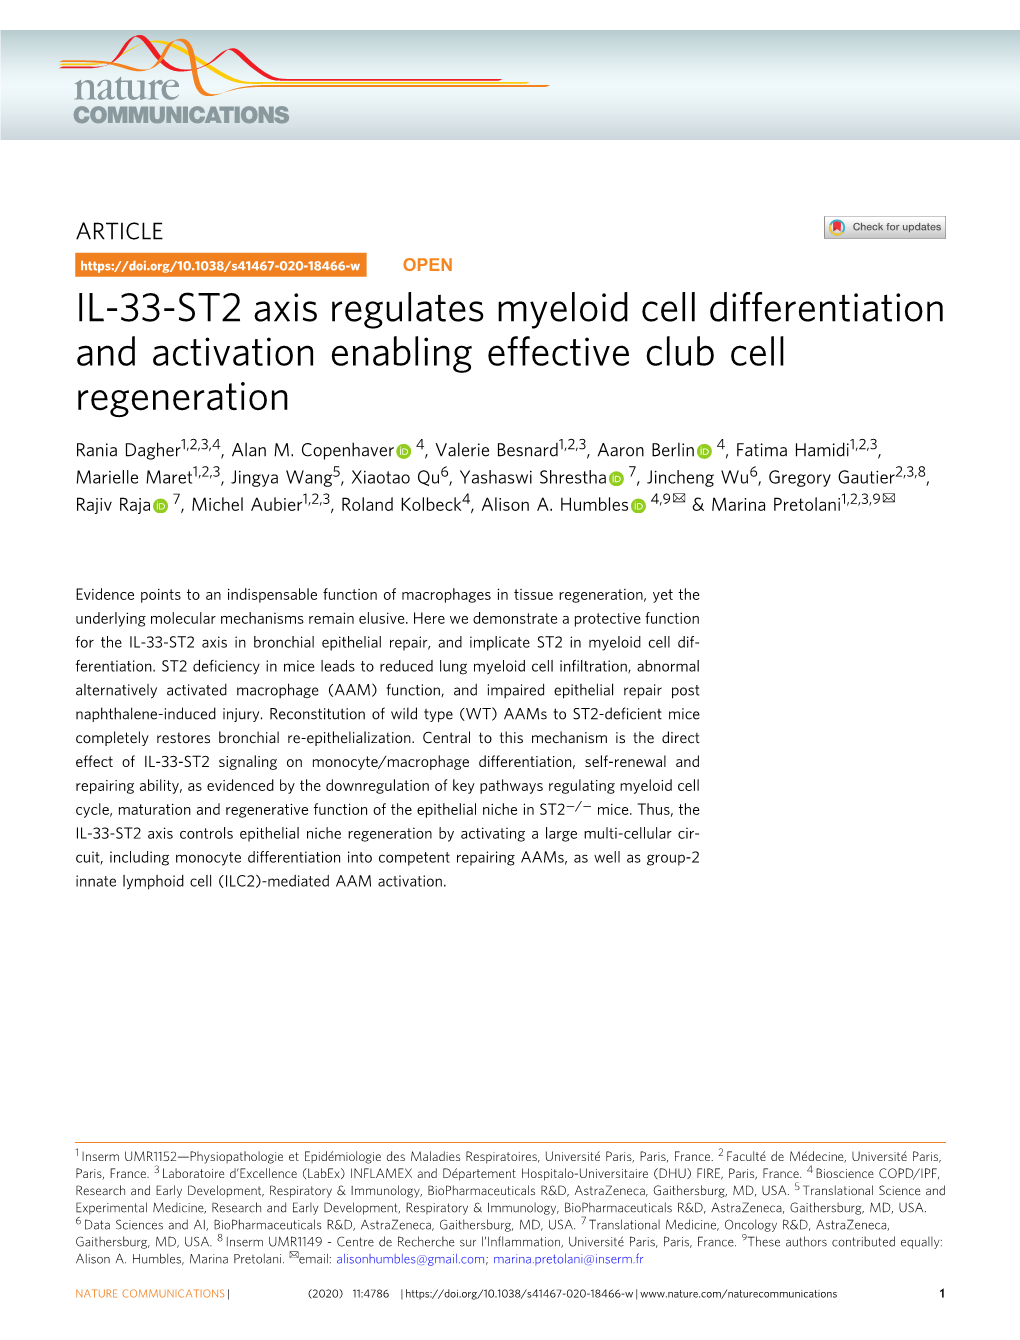 IL-33-ST2 Axis Regulates Myeloid Cell Differentiation and Activation Enabling Effective Club Cell Regeneration